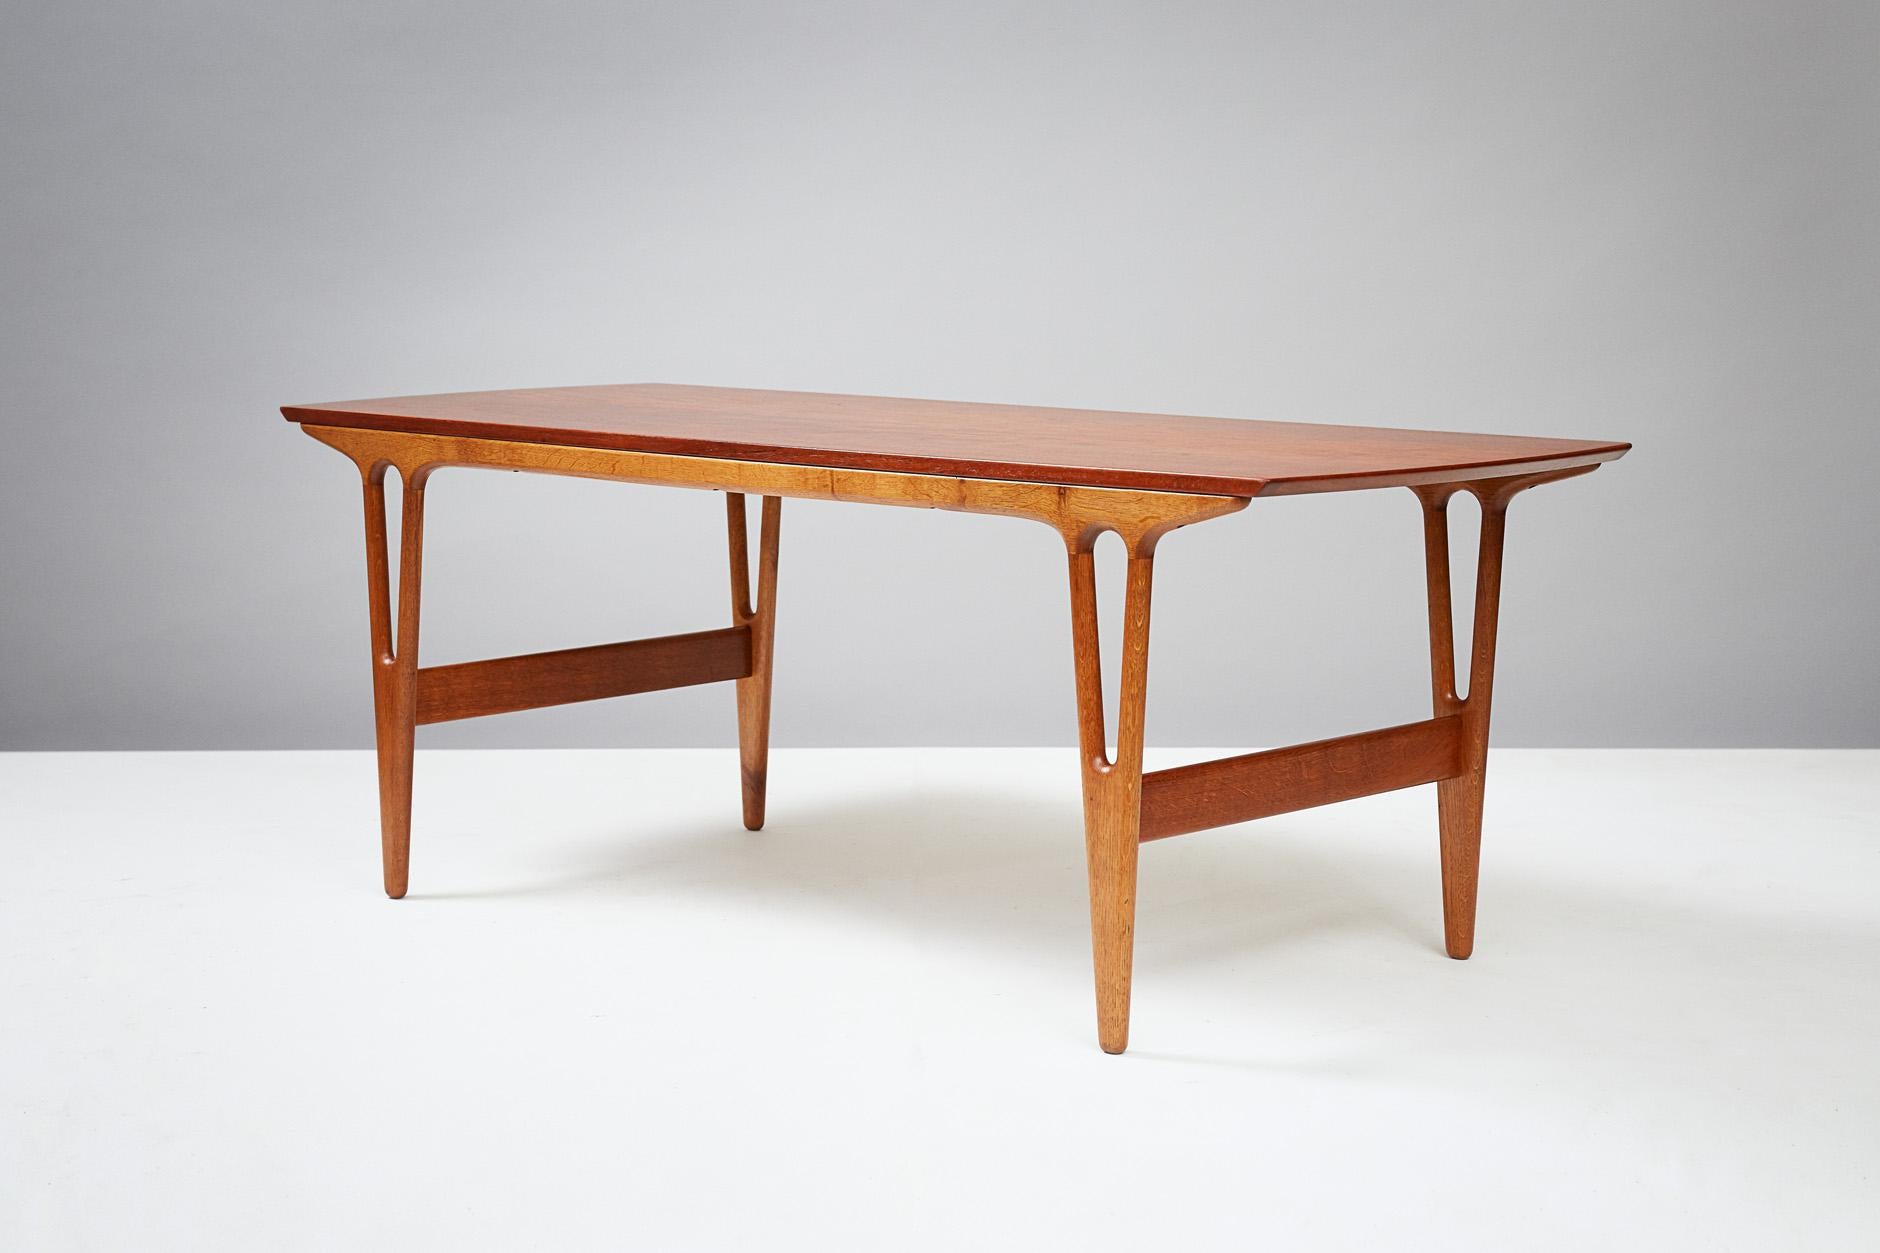 Erling Torvits

Model 25 table, circa 1960

Produced by Heltborg Mobler, Denmark. Y-shaped oak legs with solid teak top. 

